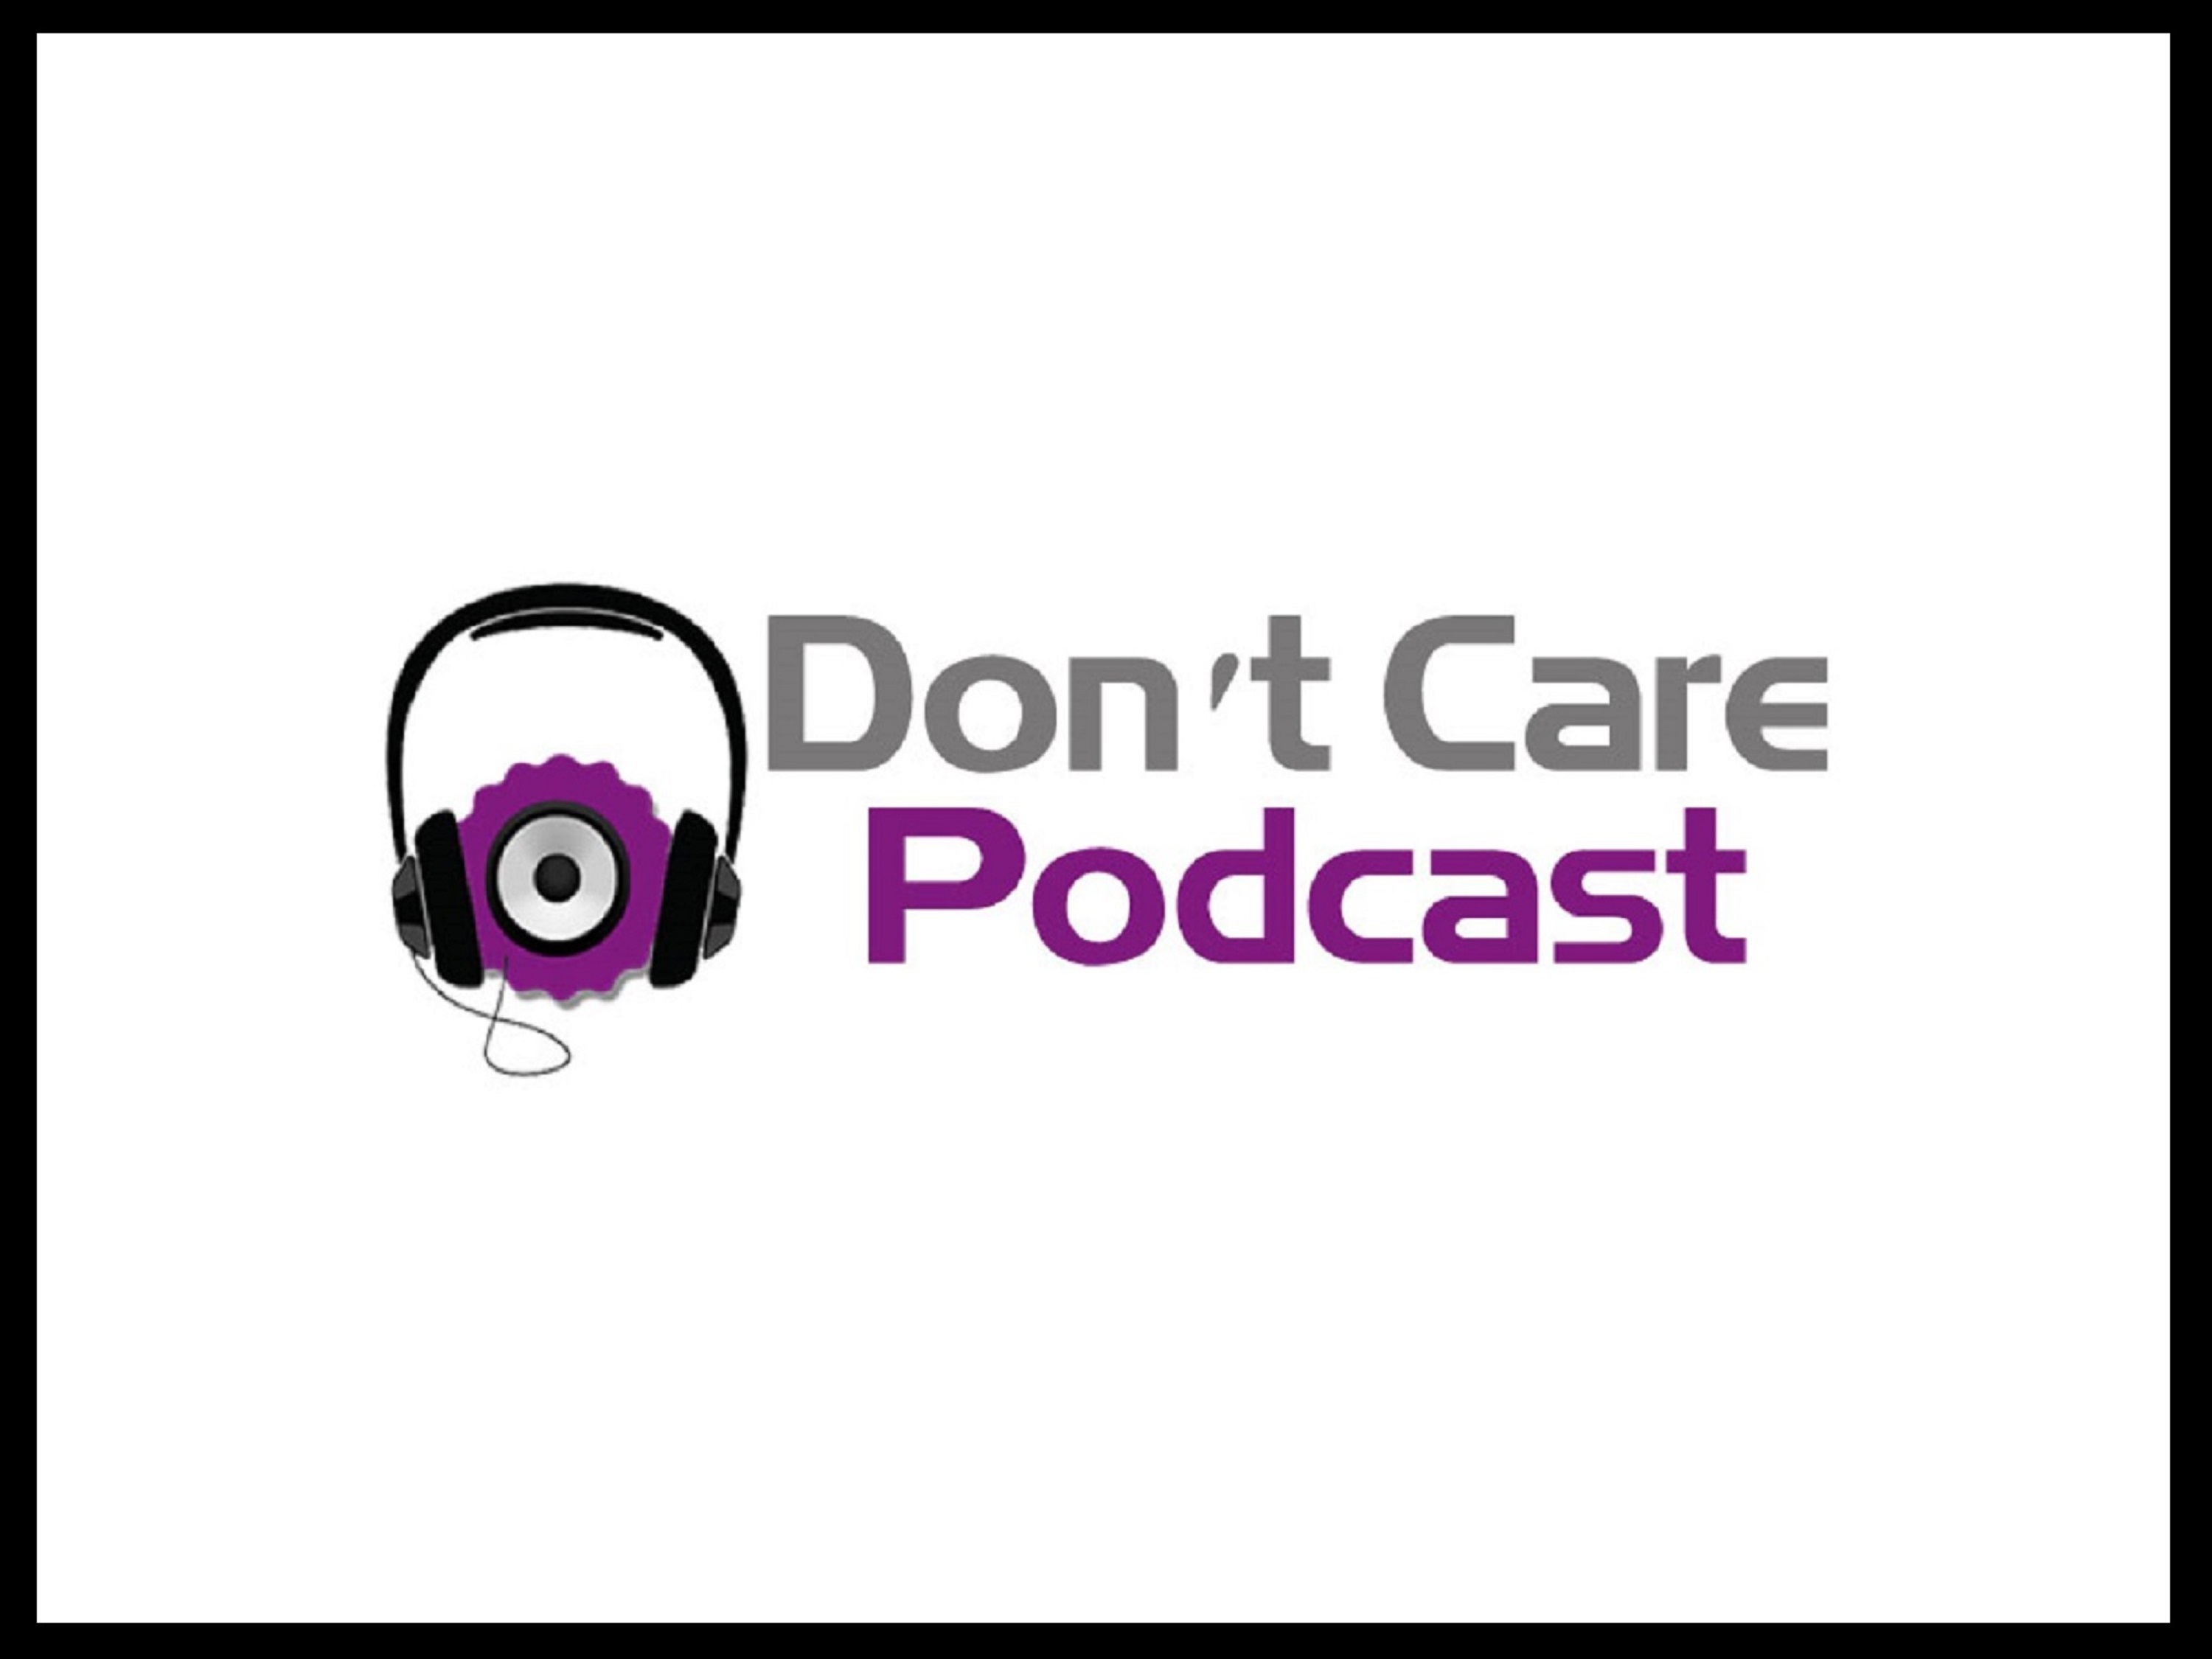 Don't Care Podcast